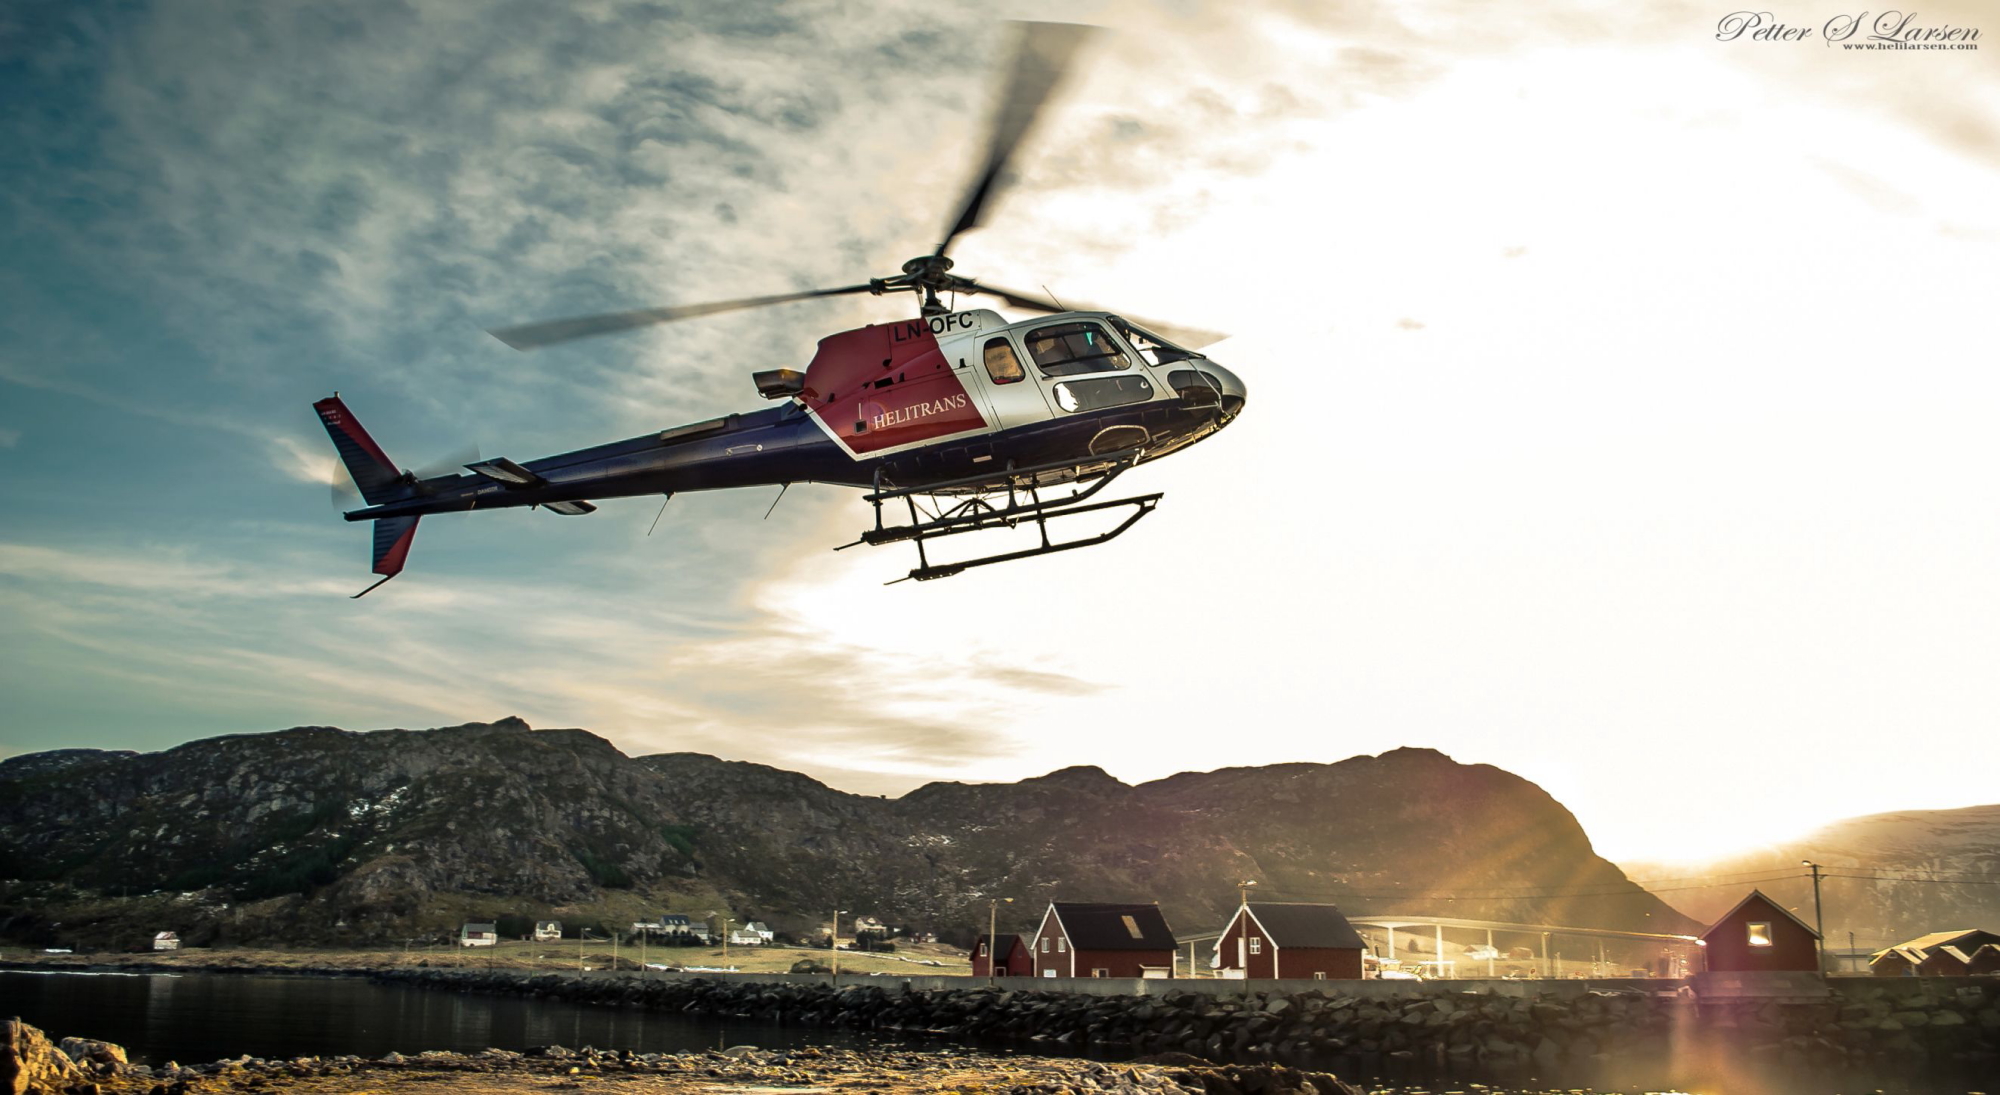 Helitrans, a Norwegian helicopter operator, has acquired four light single H125 Airbus helicopters. The H125s will be used for a wide range of missions that cover power line construction and firefighting, as well as sightseeing trips, photo shoots and reindeer herding. The four new aircraft will be delivered in spring 2019. Click to enlarge.